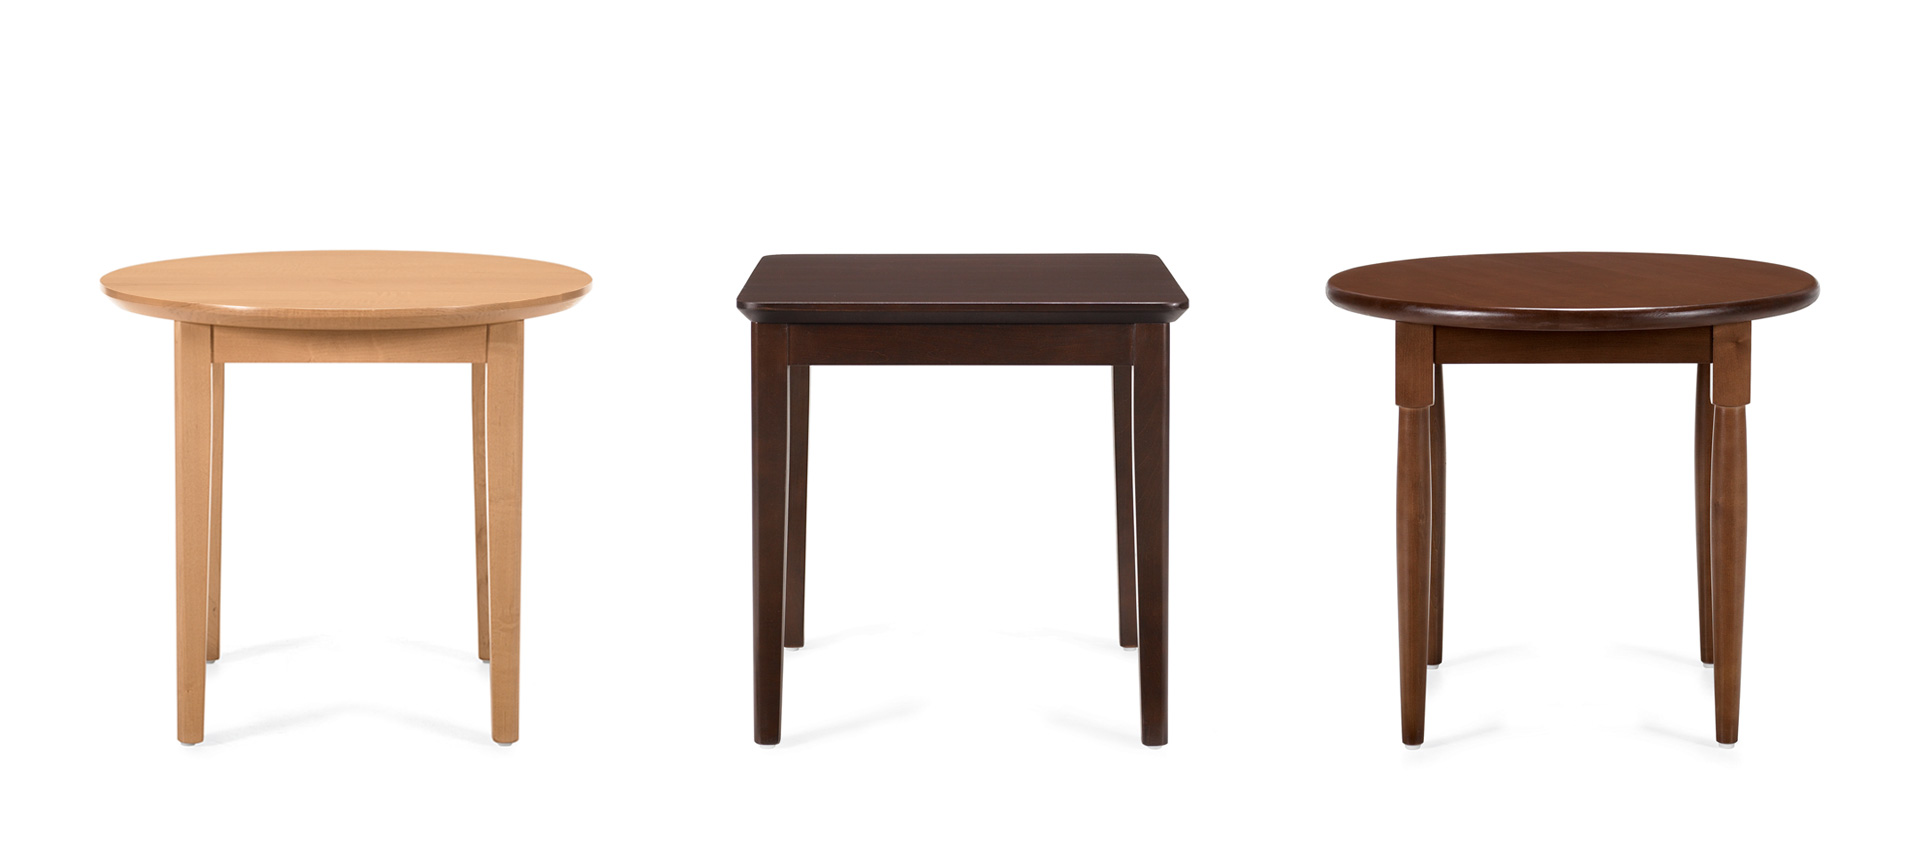 Image of three styles of occasional tables